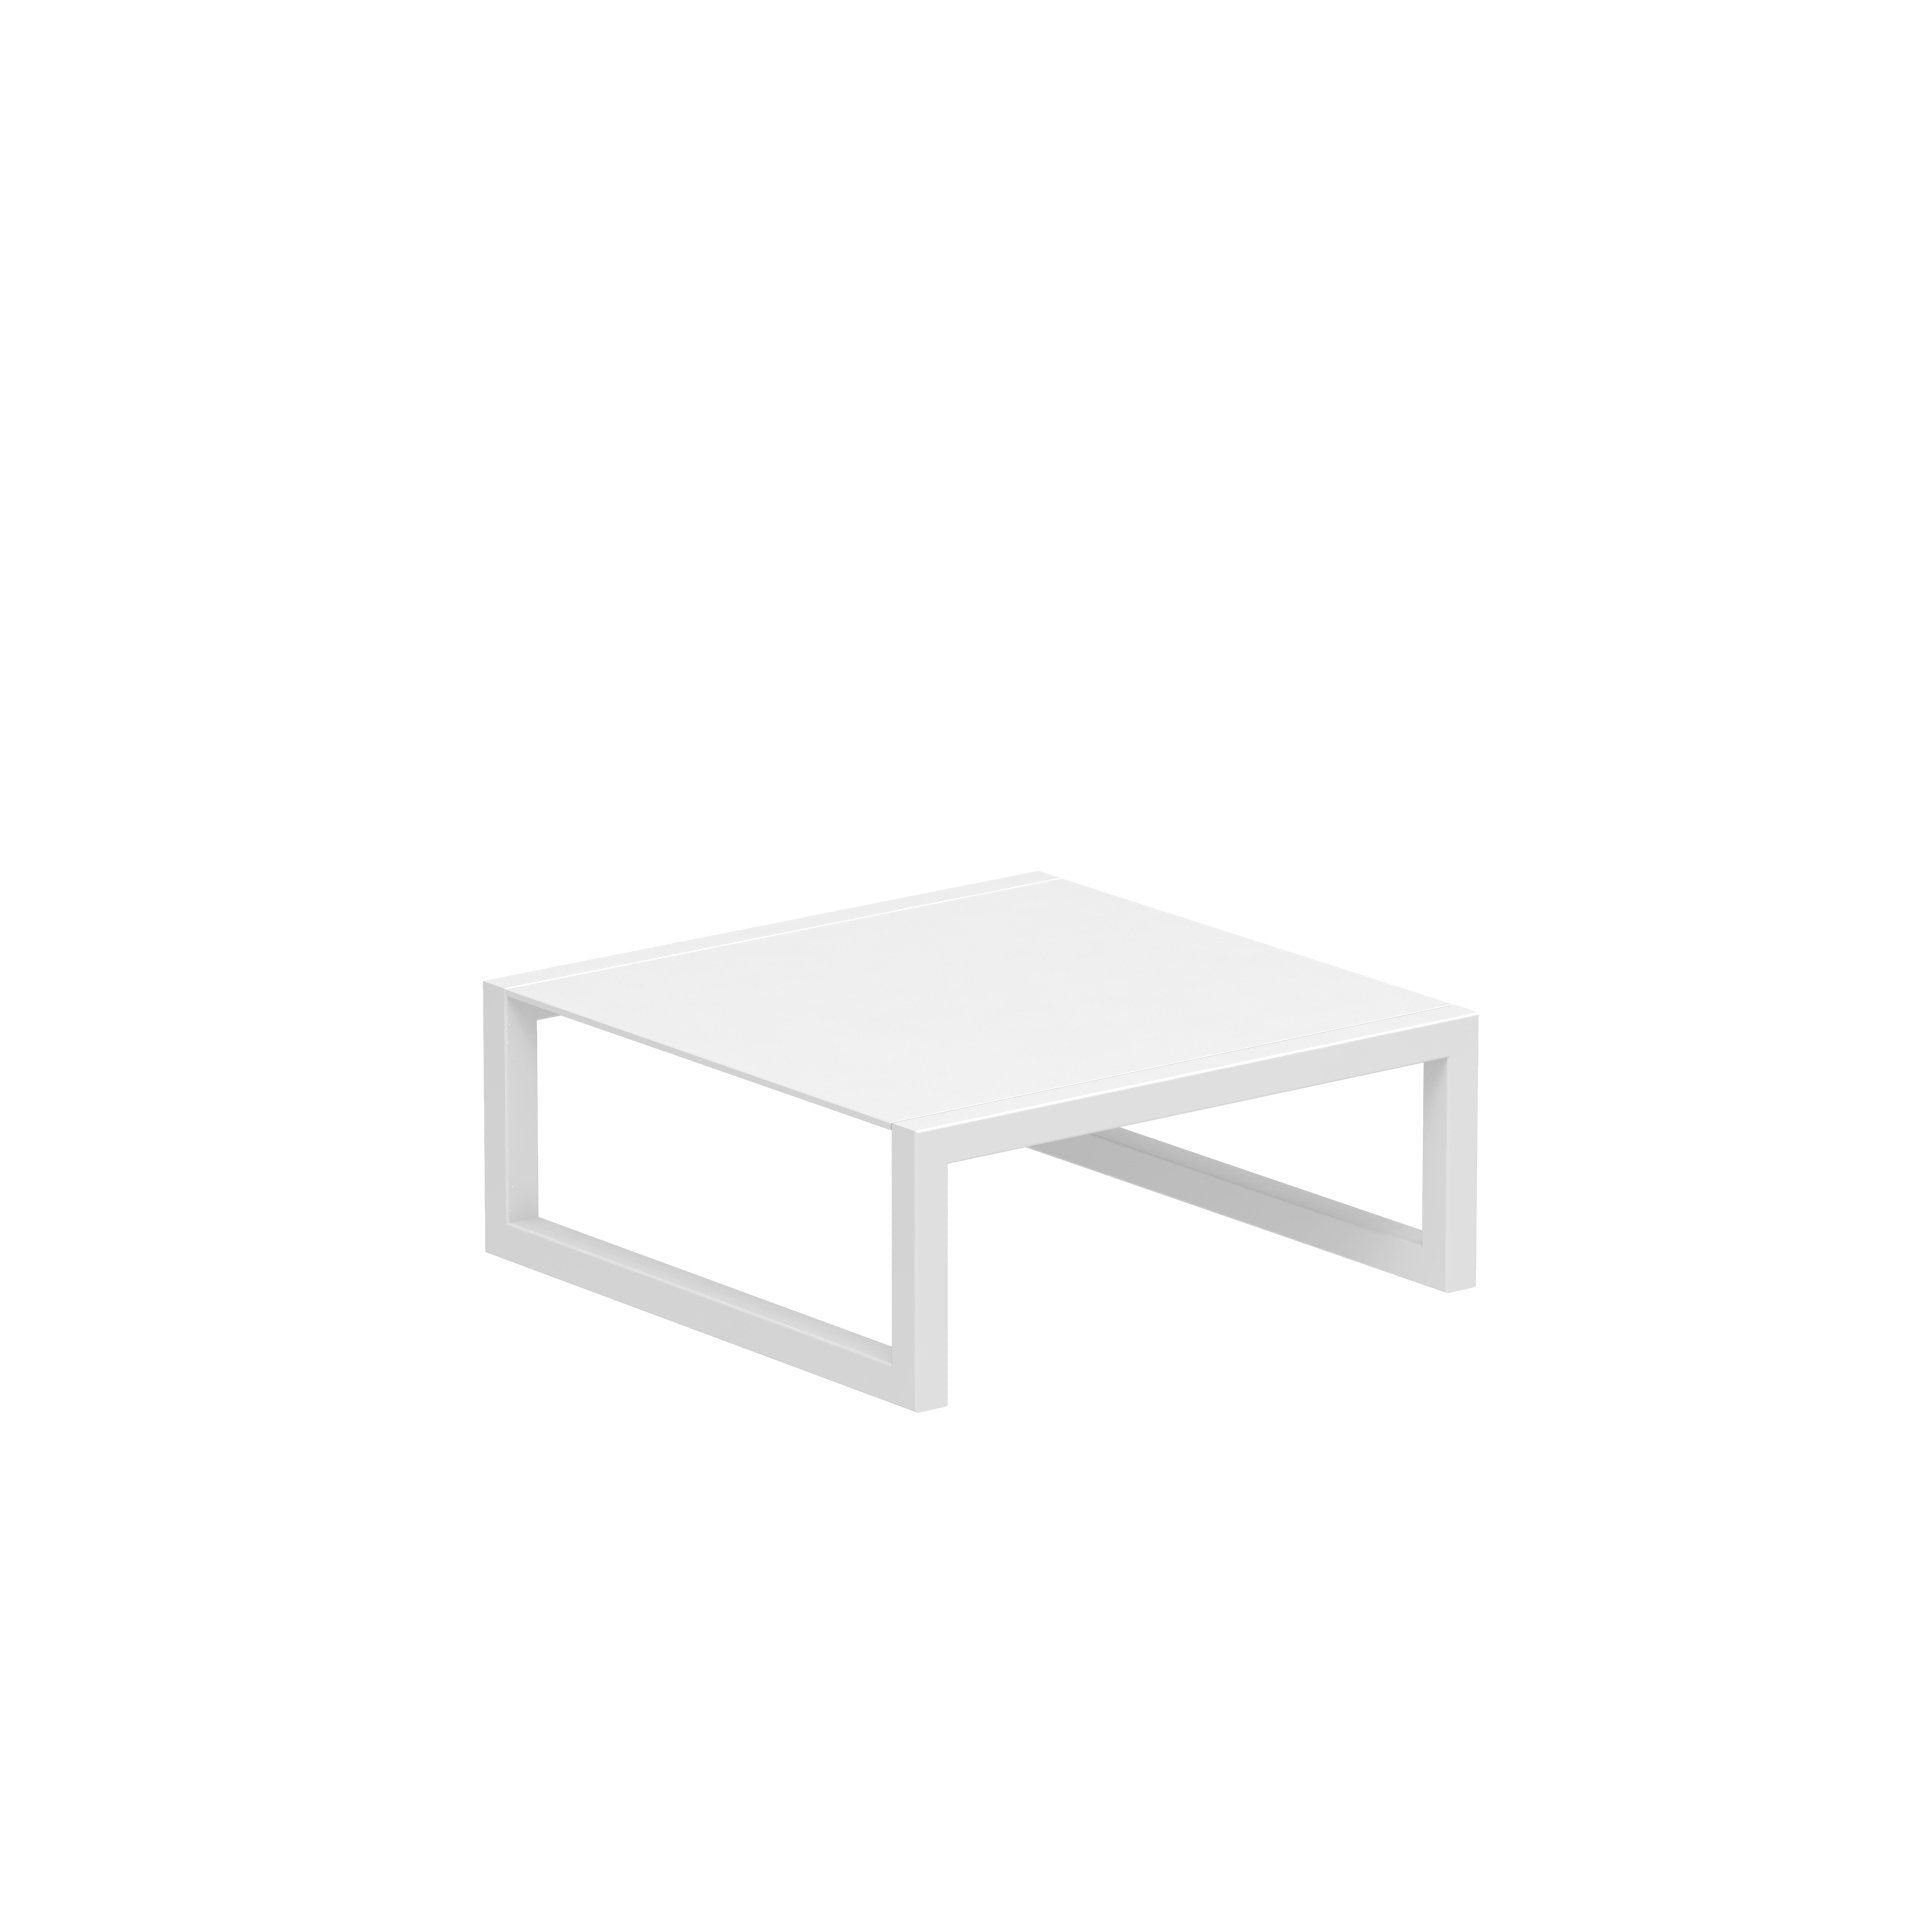 Ninix Powder-coated Low Table in White